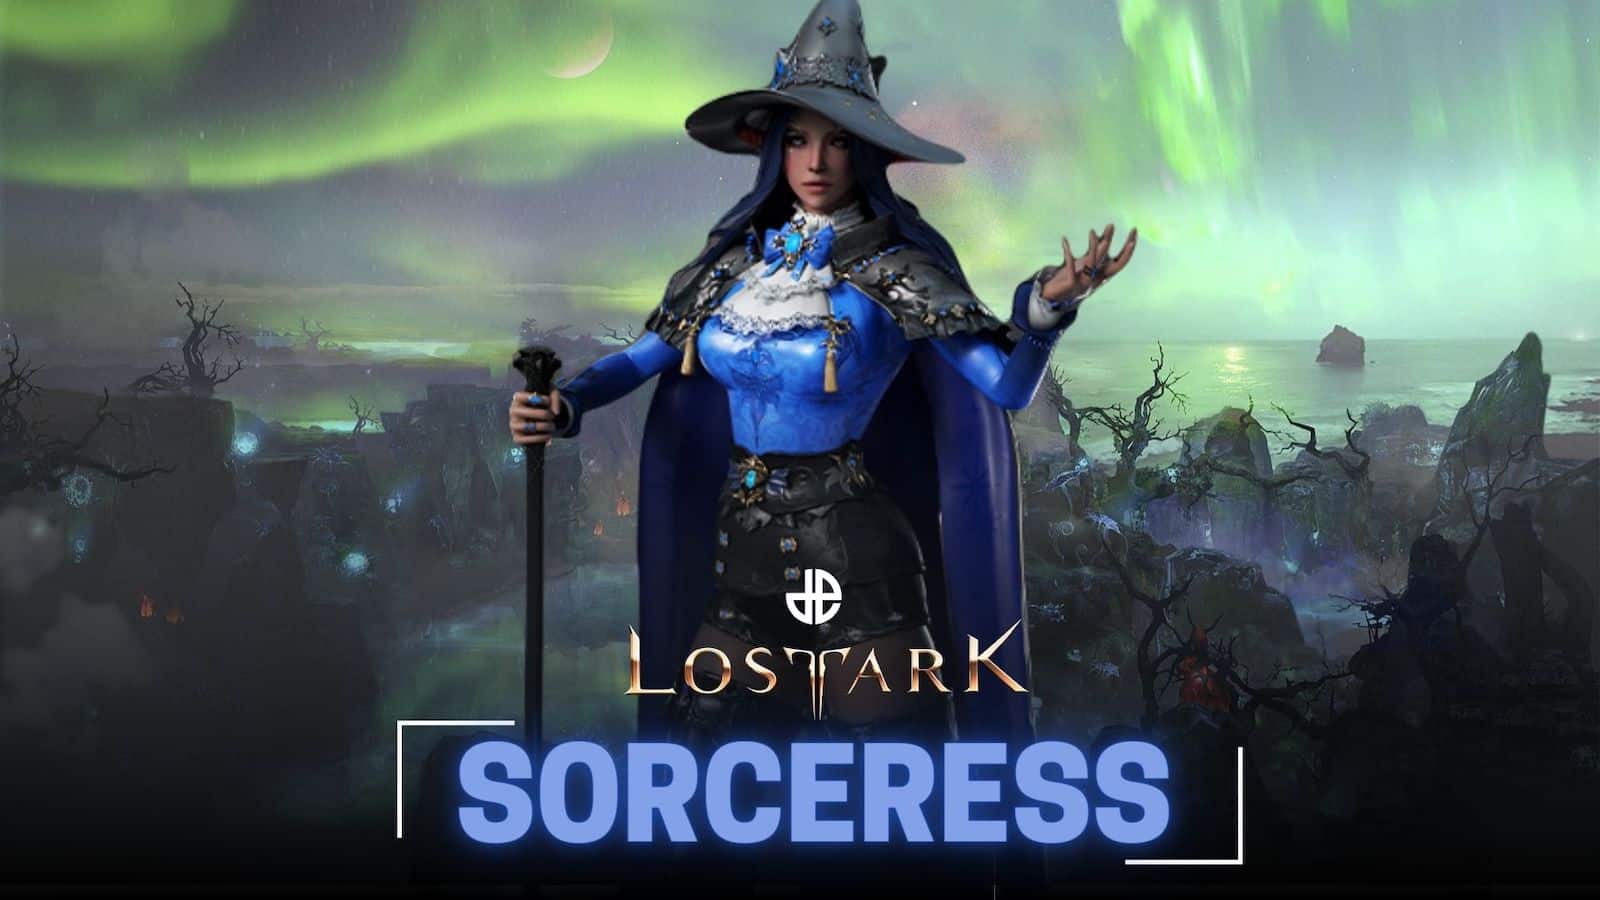 The Highest DPS Sorceress Build In Lost Ark